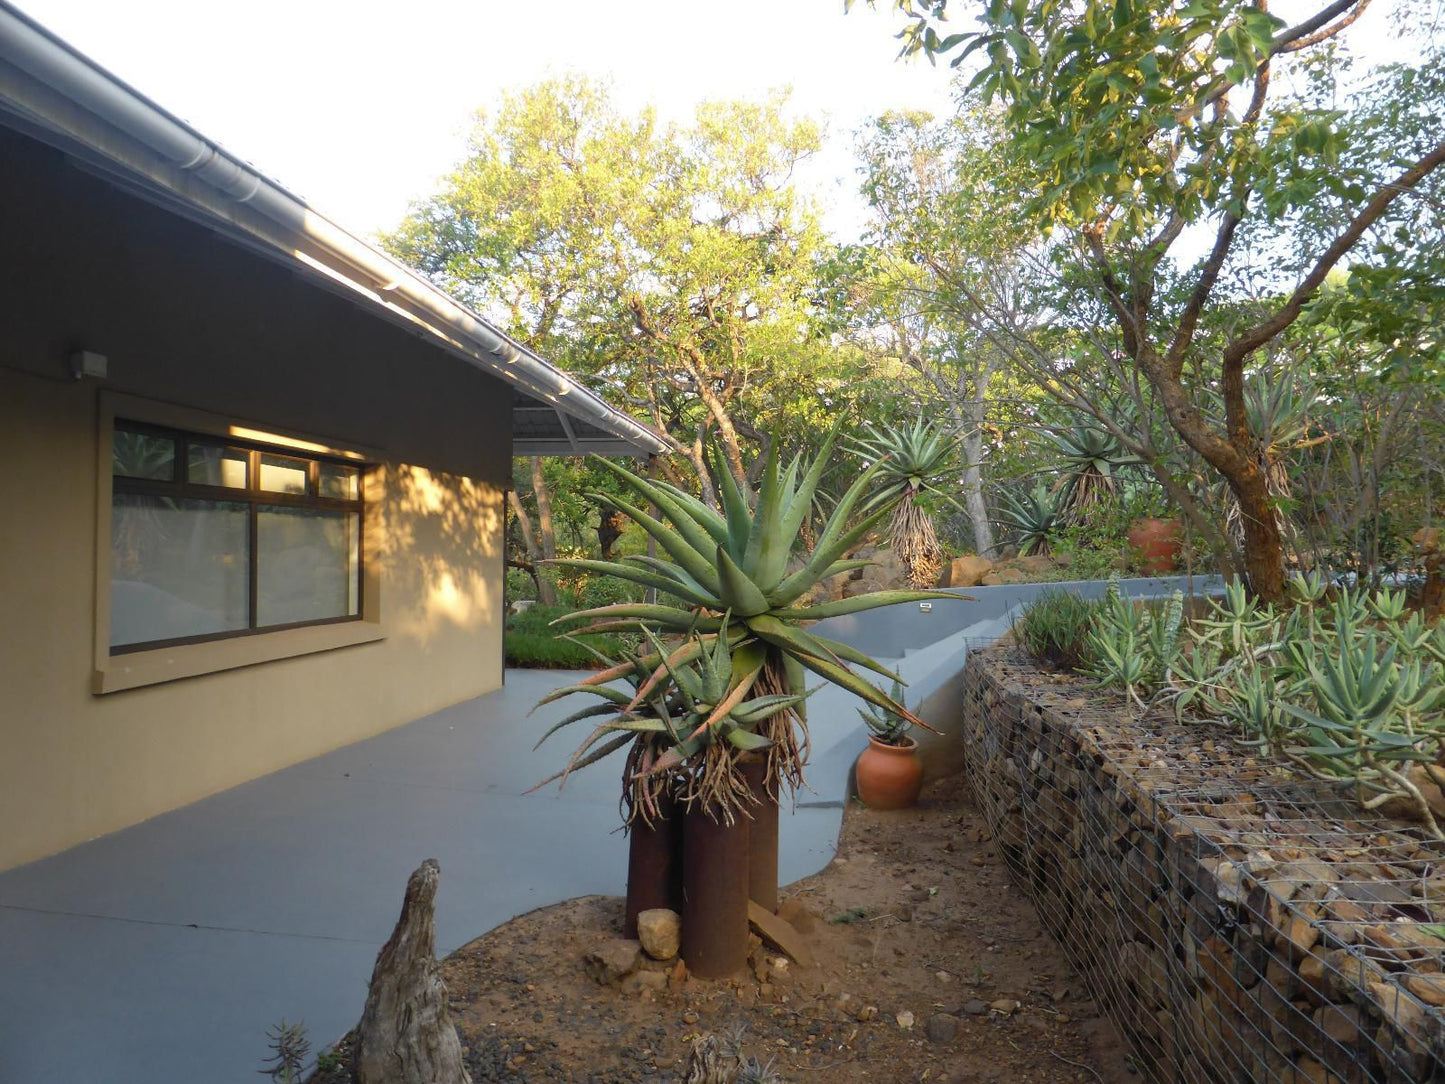 Ukuthula Self Catering Cottages Kampersrus Limpopo Province South Africa Cactus, Plant, Nature, Palm Tree, Wood, Garden